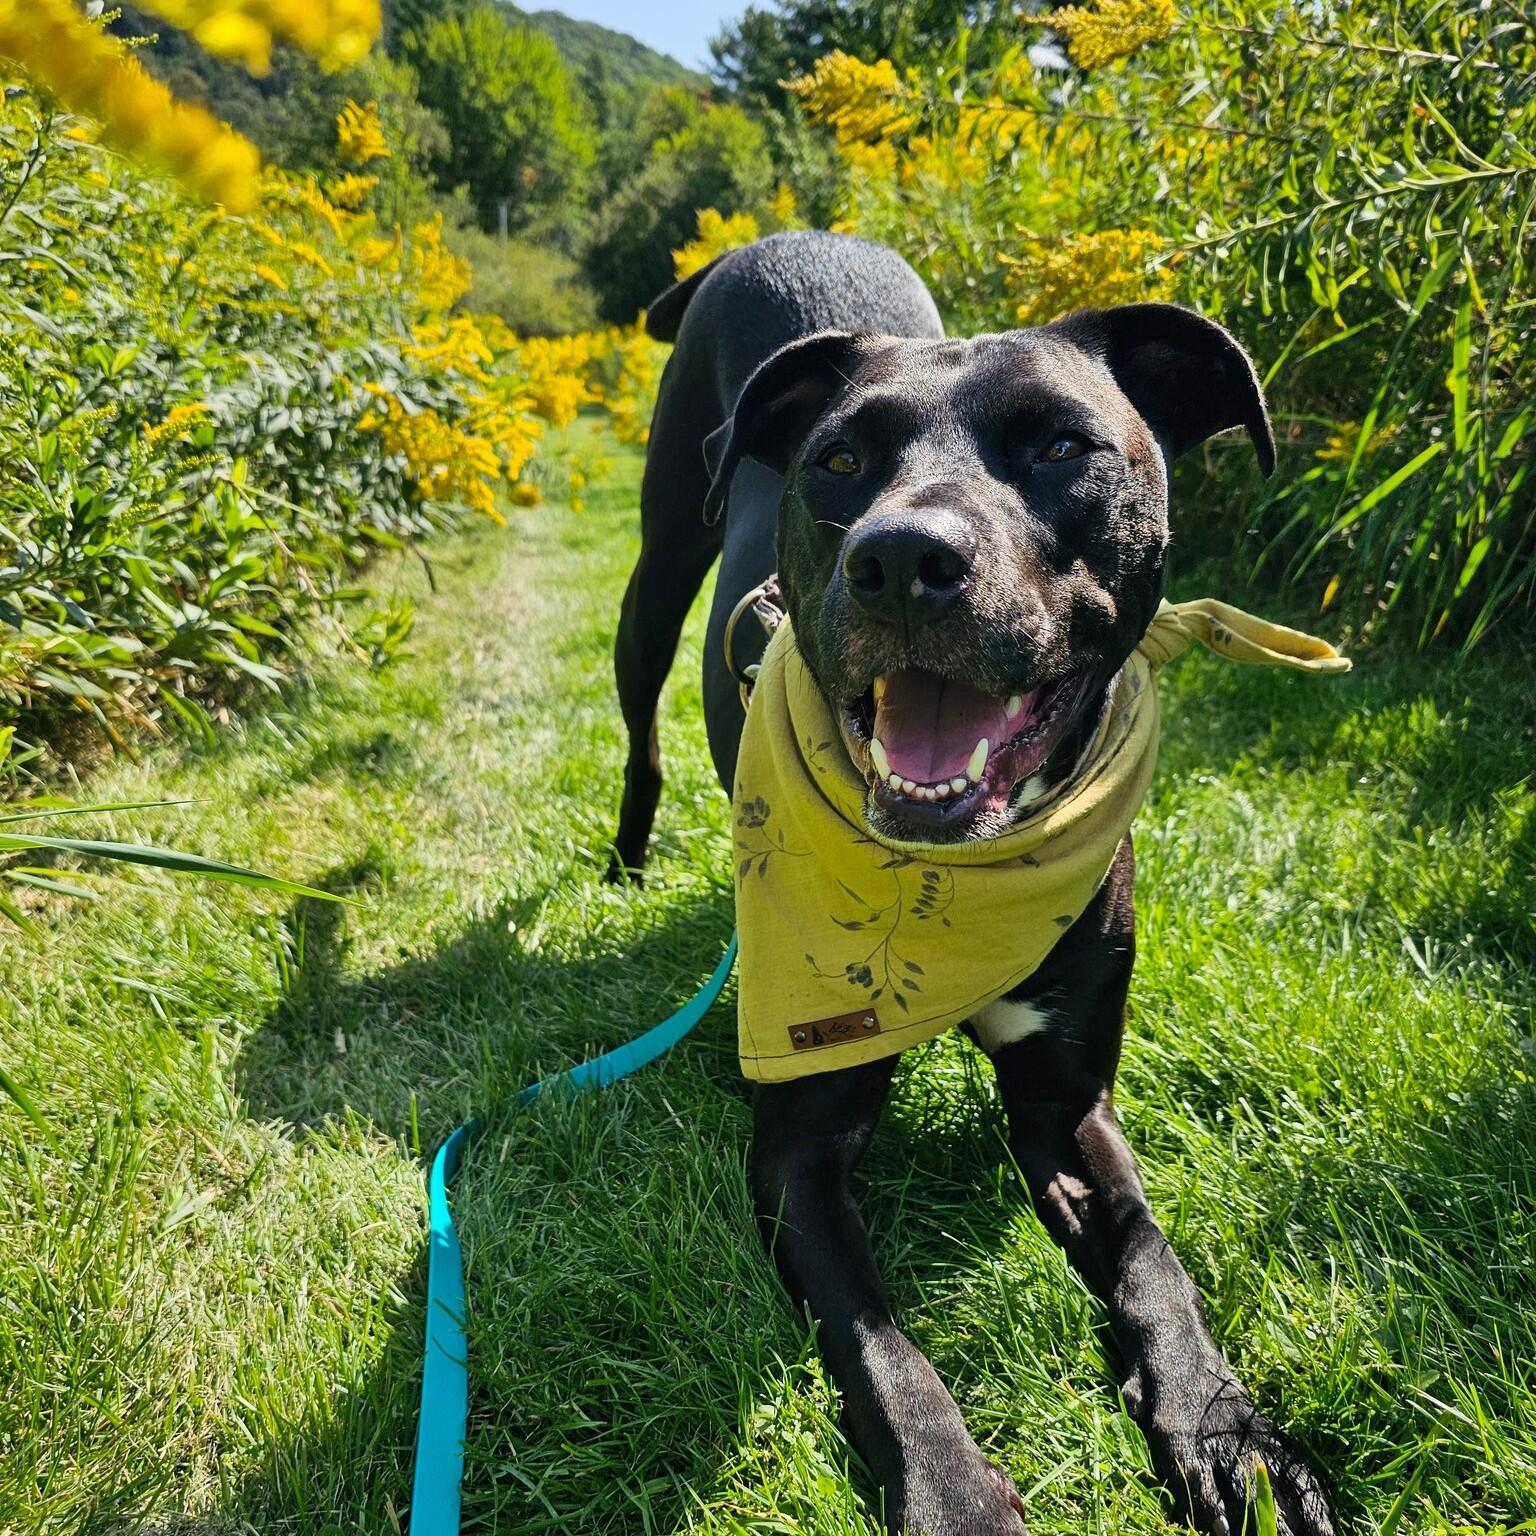 A black,mixed-breed dog "bowing" in front the camera. He is wearing a yellow bandana and a blue leash. The trail is lined with goldenrod.